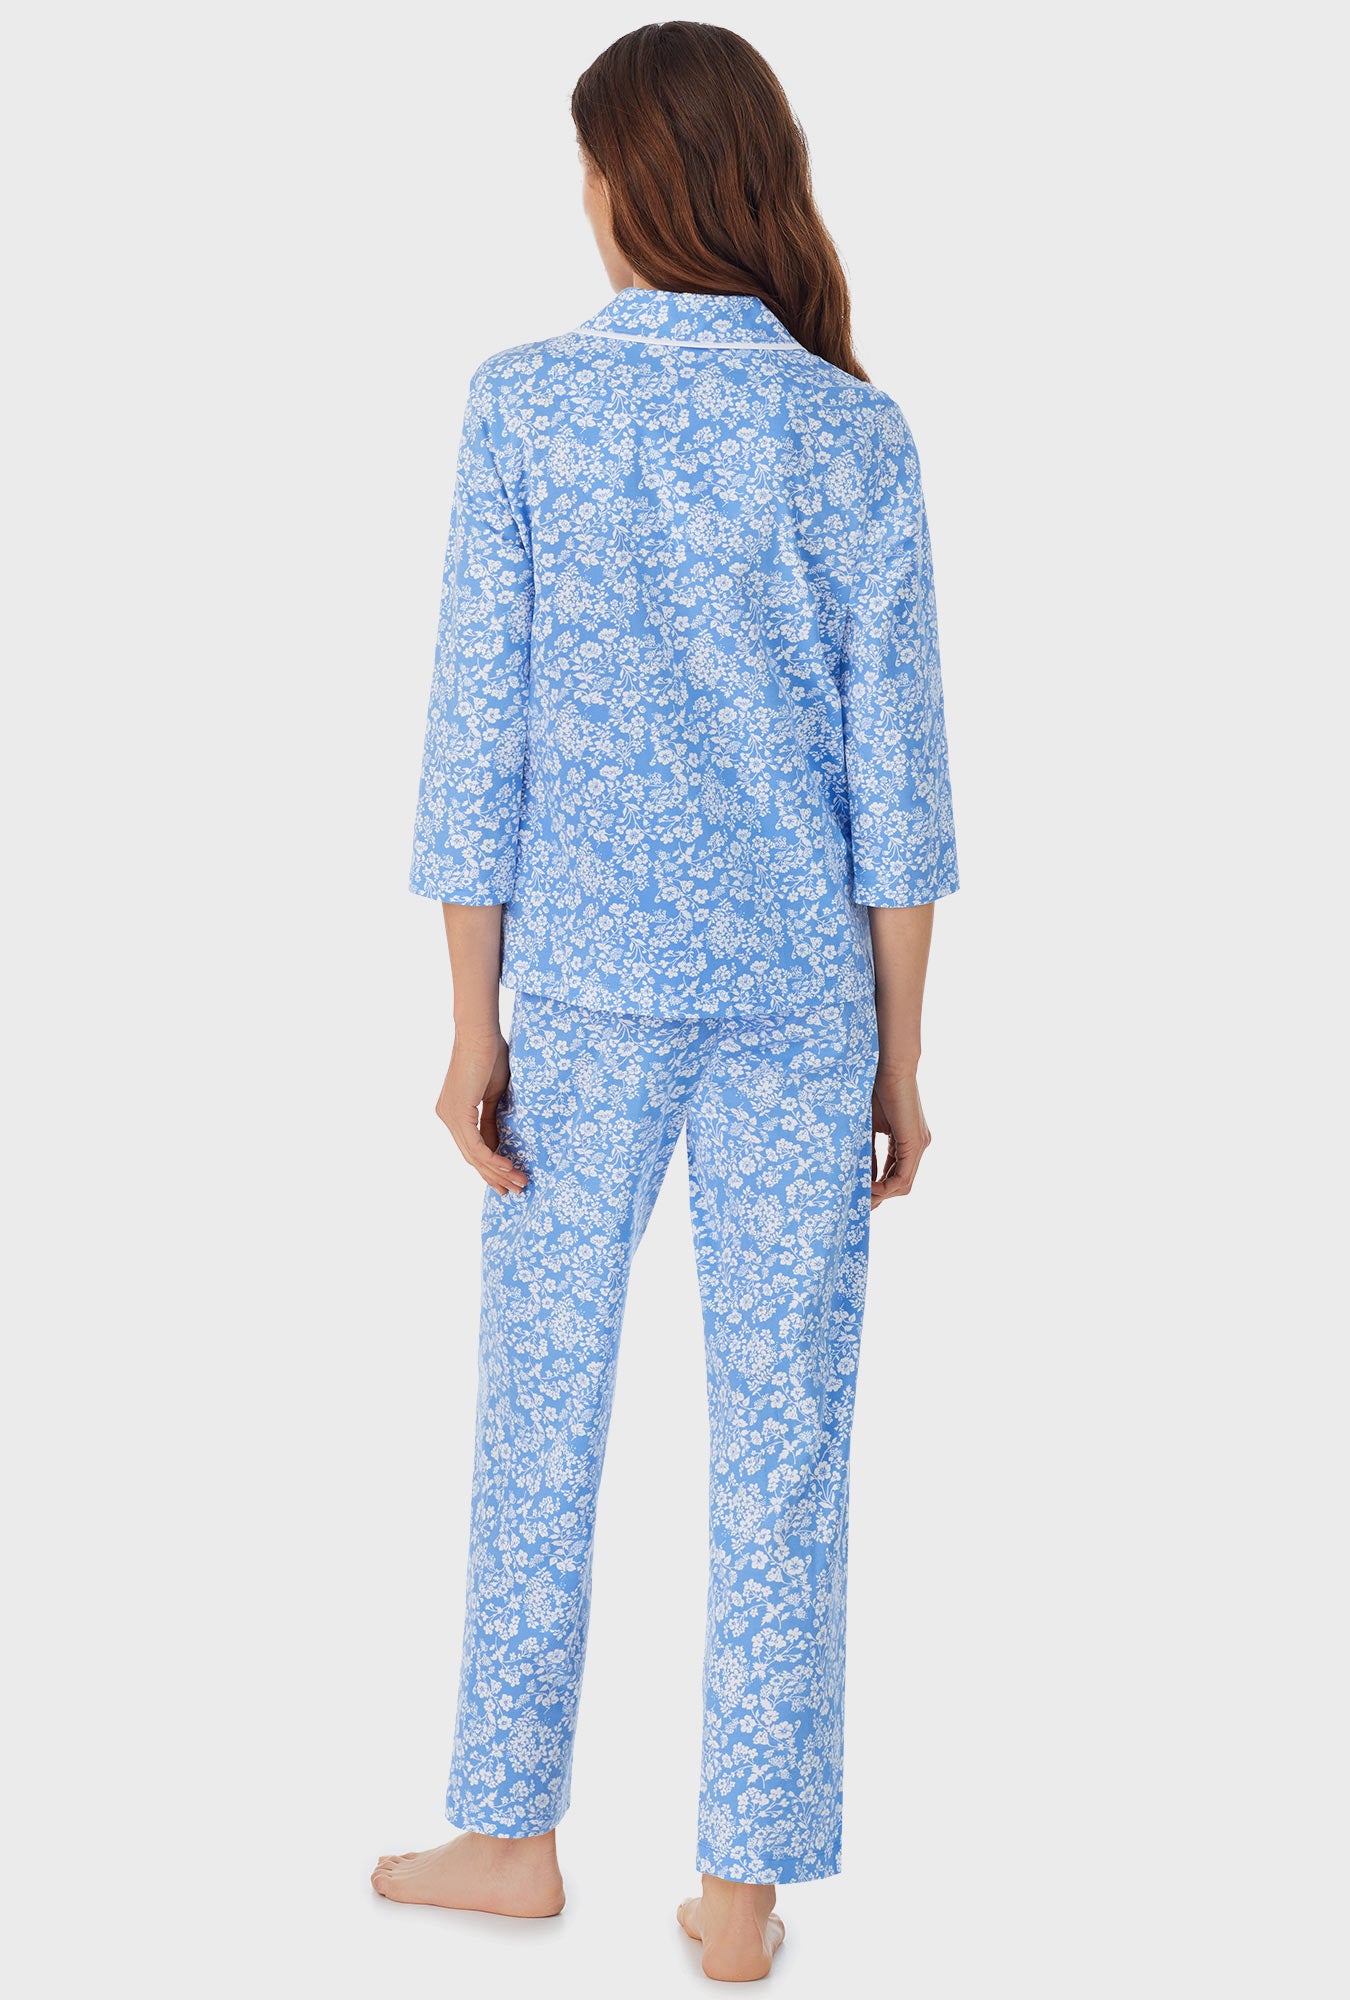 A lady wearing blue long pajama set with Cutout Floral  print